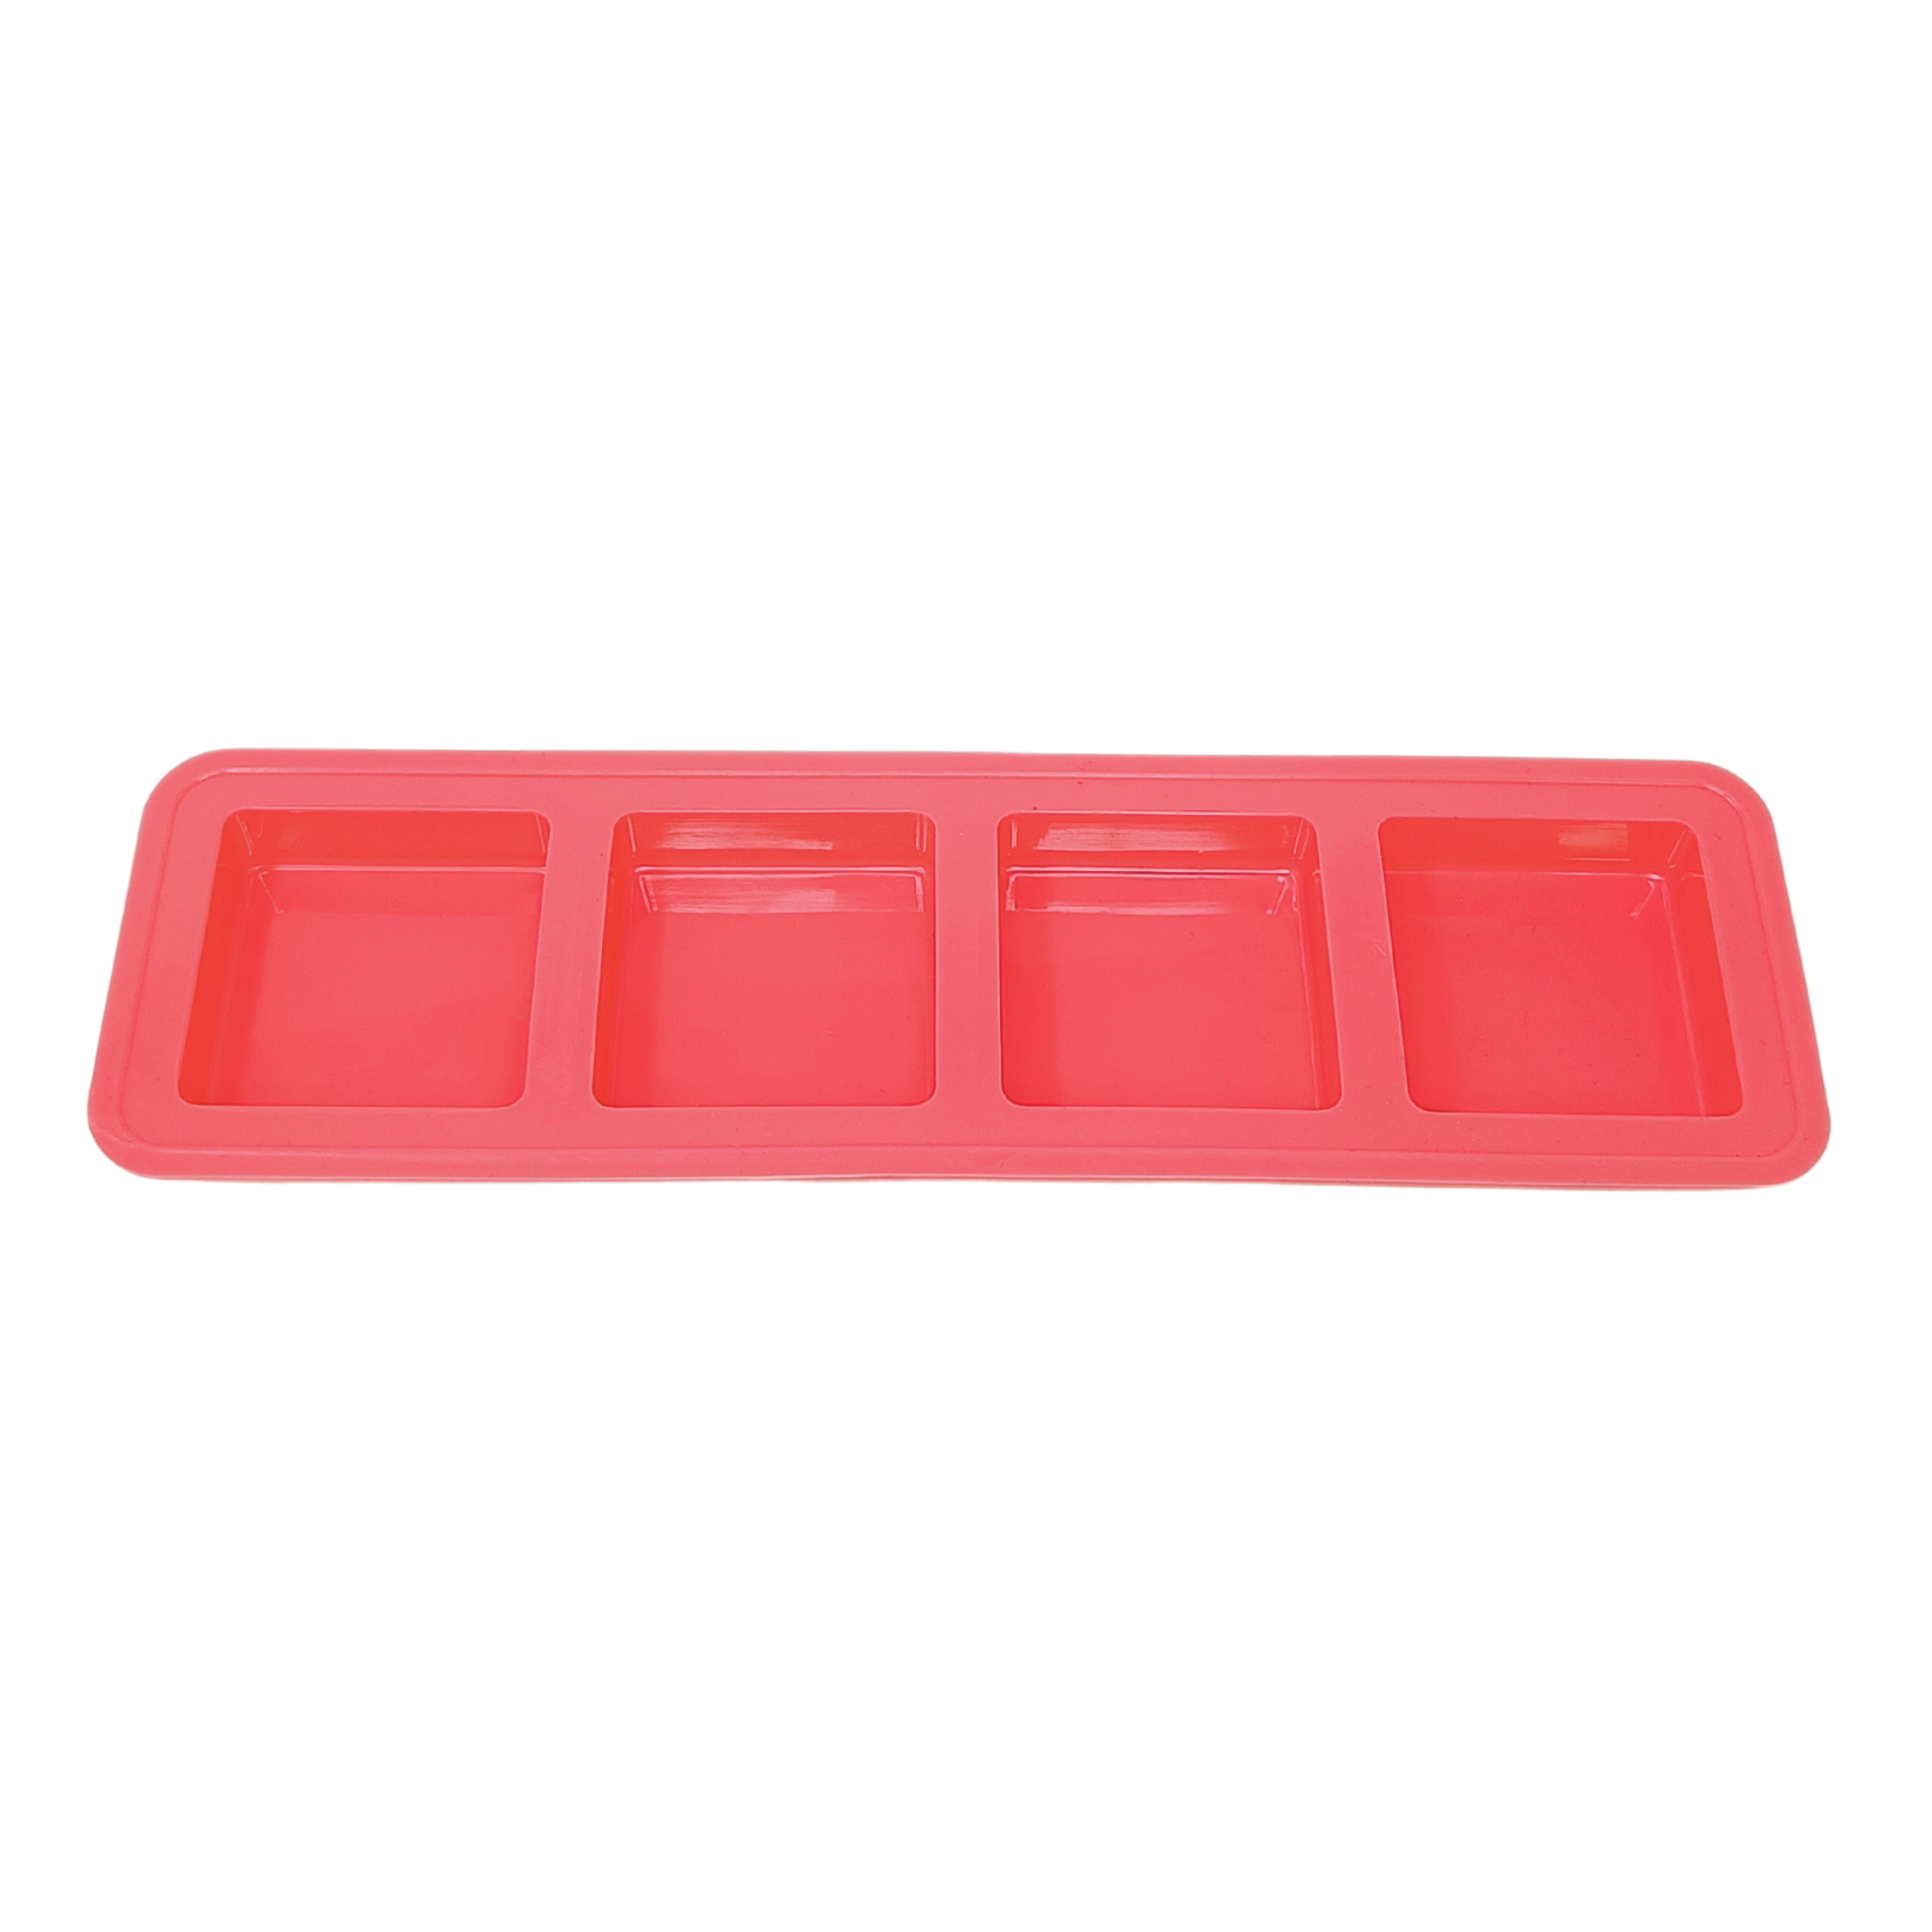 75ml Square Soap Mould - The Mould Story